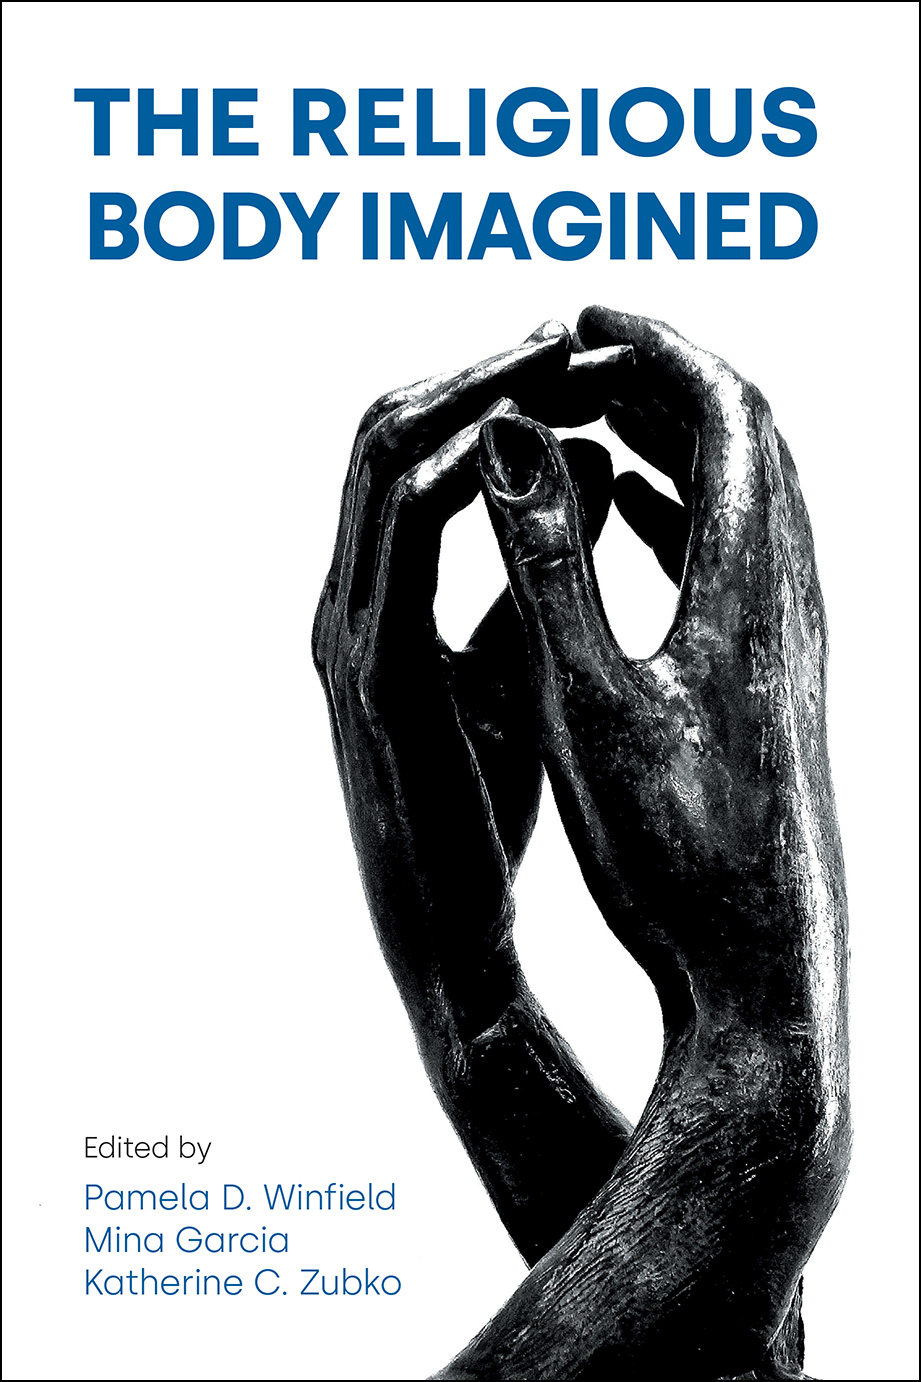 The Religious Body Imagined